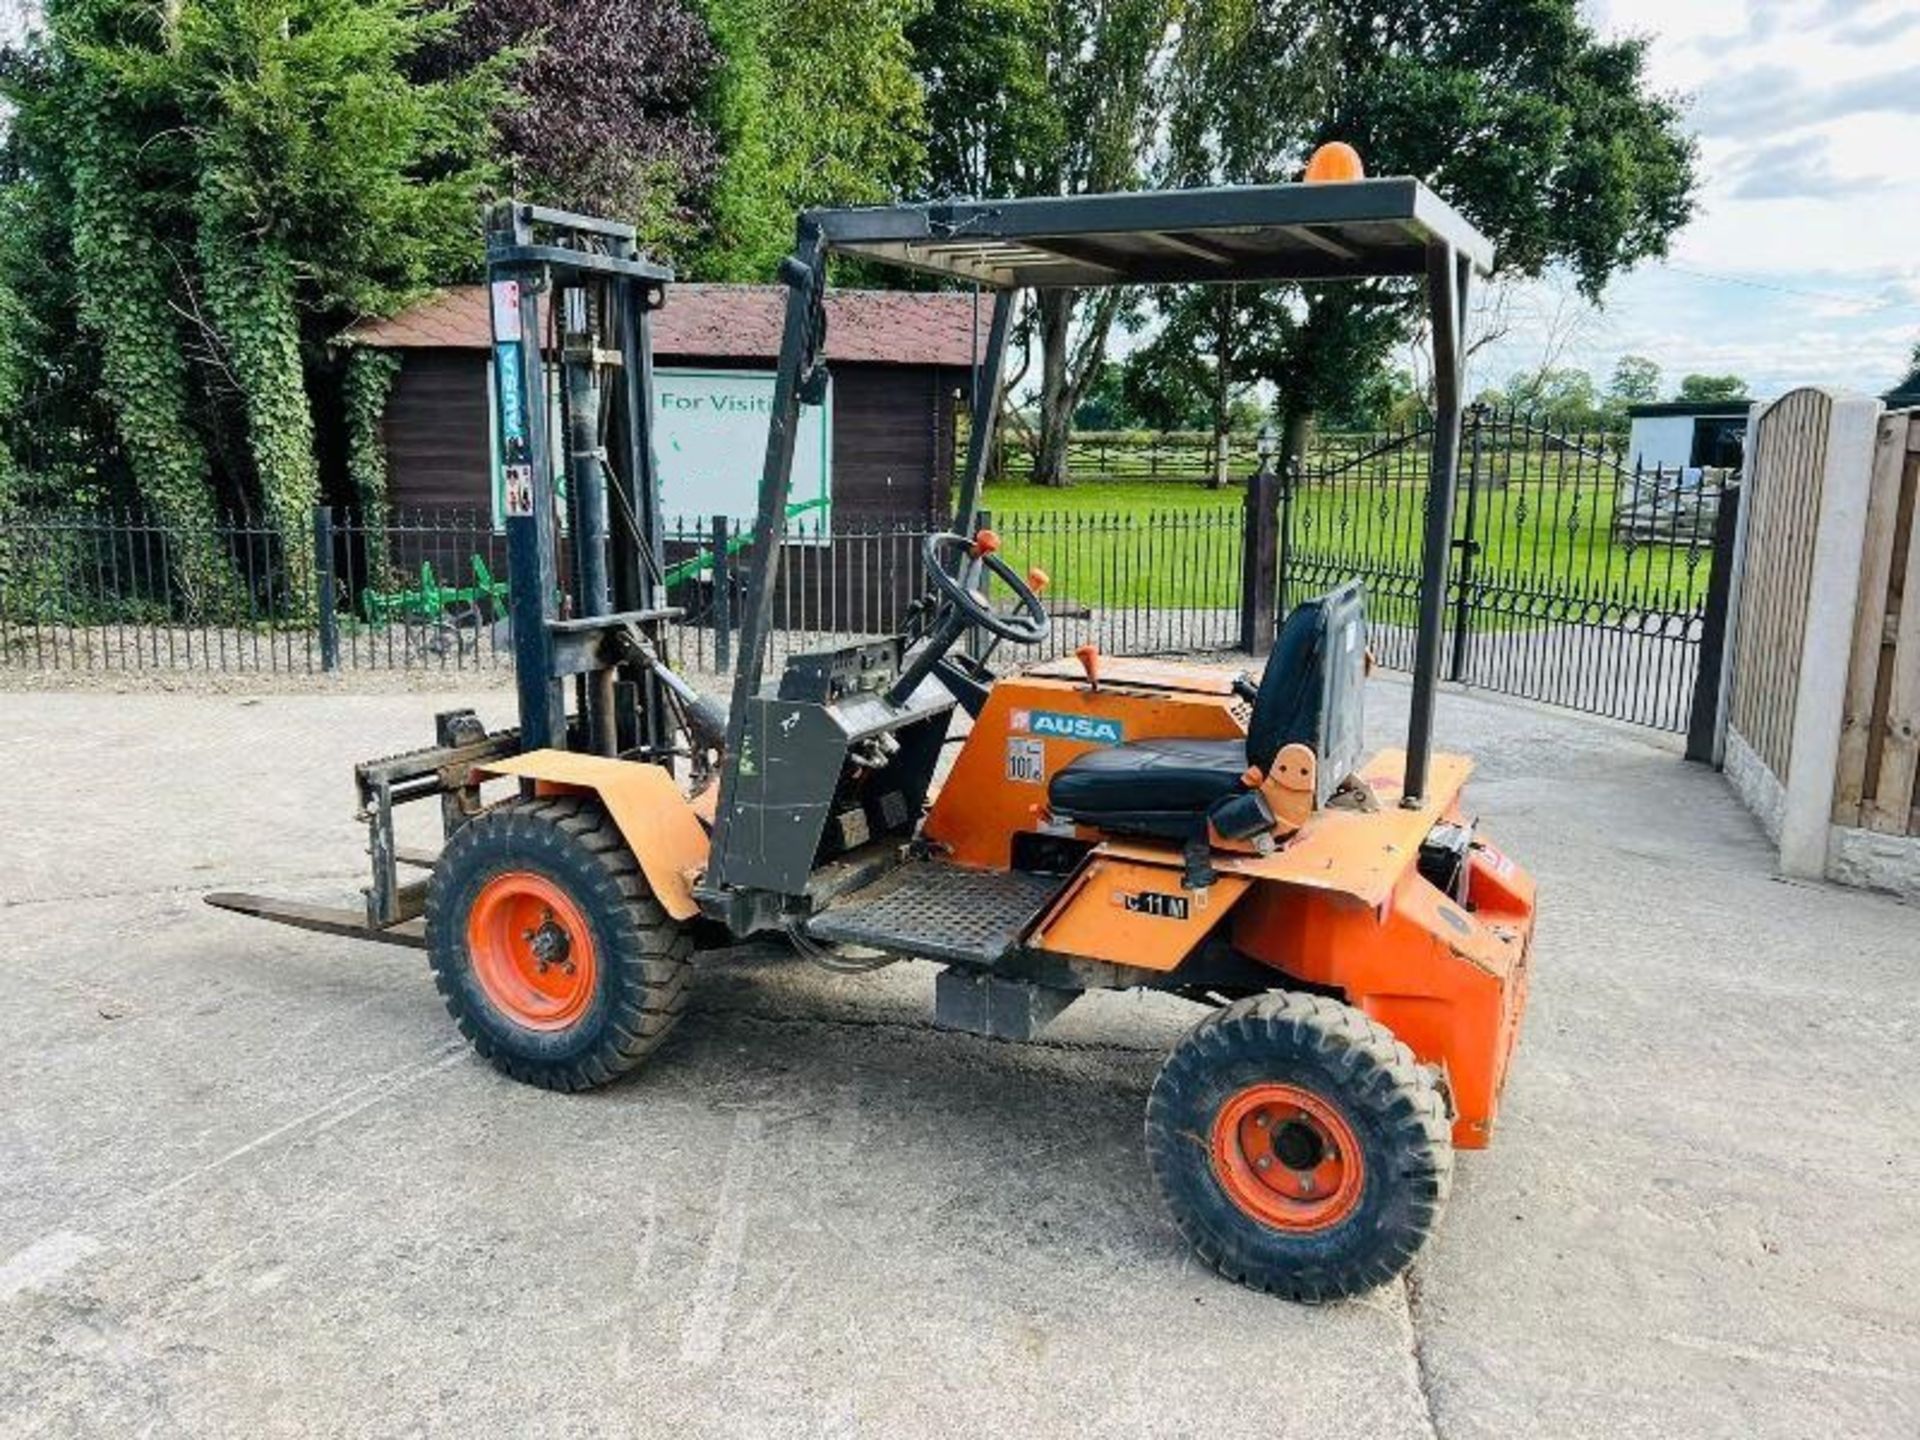 AUSA C11M ROUGH TERRIAN FORKLIFT * YEAR 2015 * C/W SIDE SHIFT - Image 6 of 13